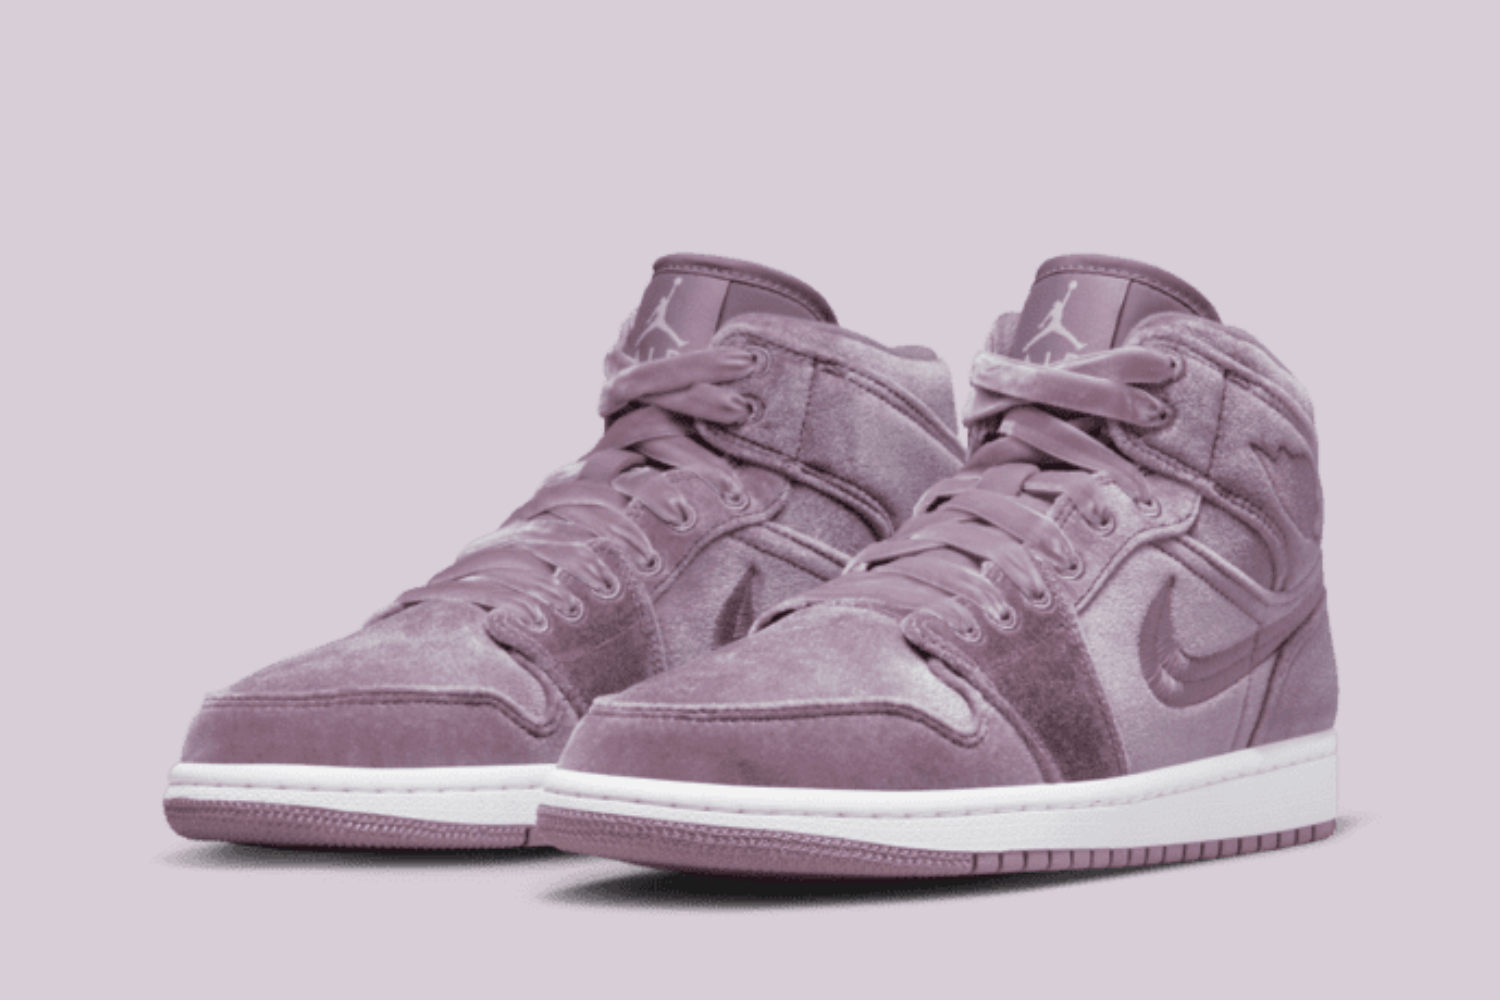 How to style the Air Jordan 1 Mid SE WMNS 'Purple Smoke'